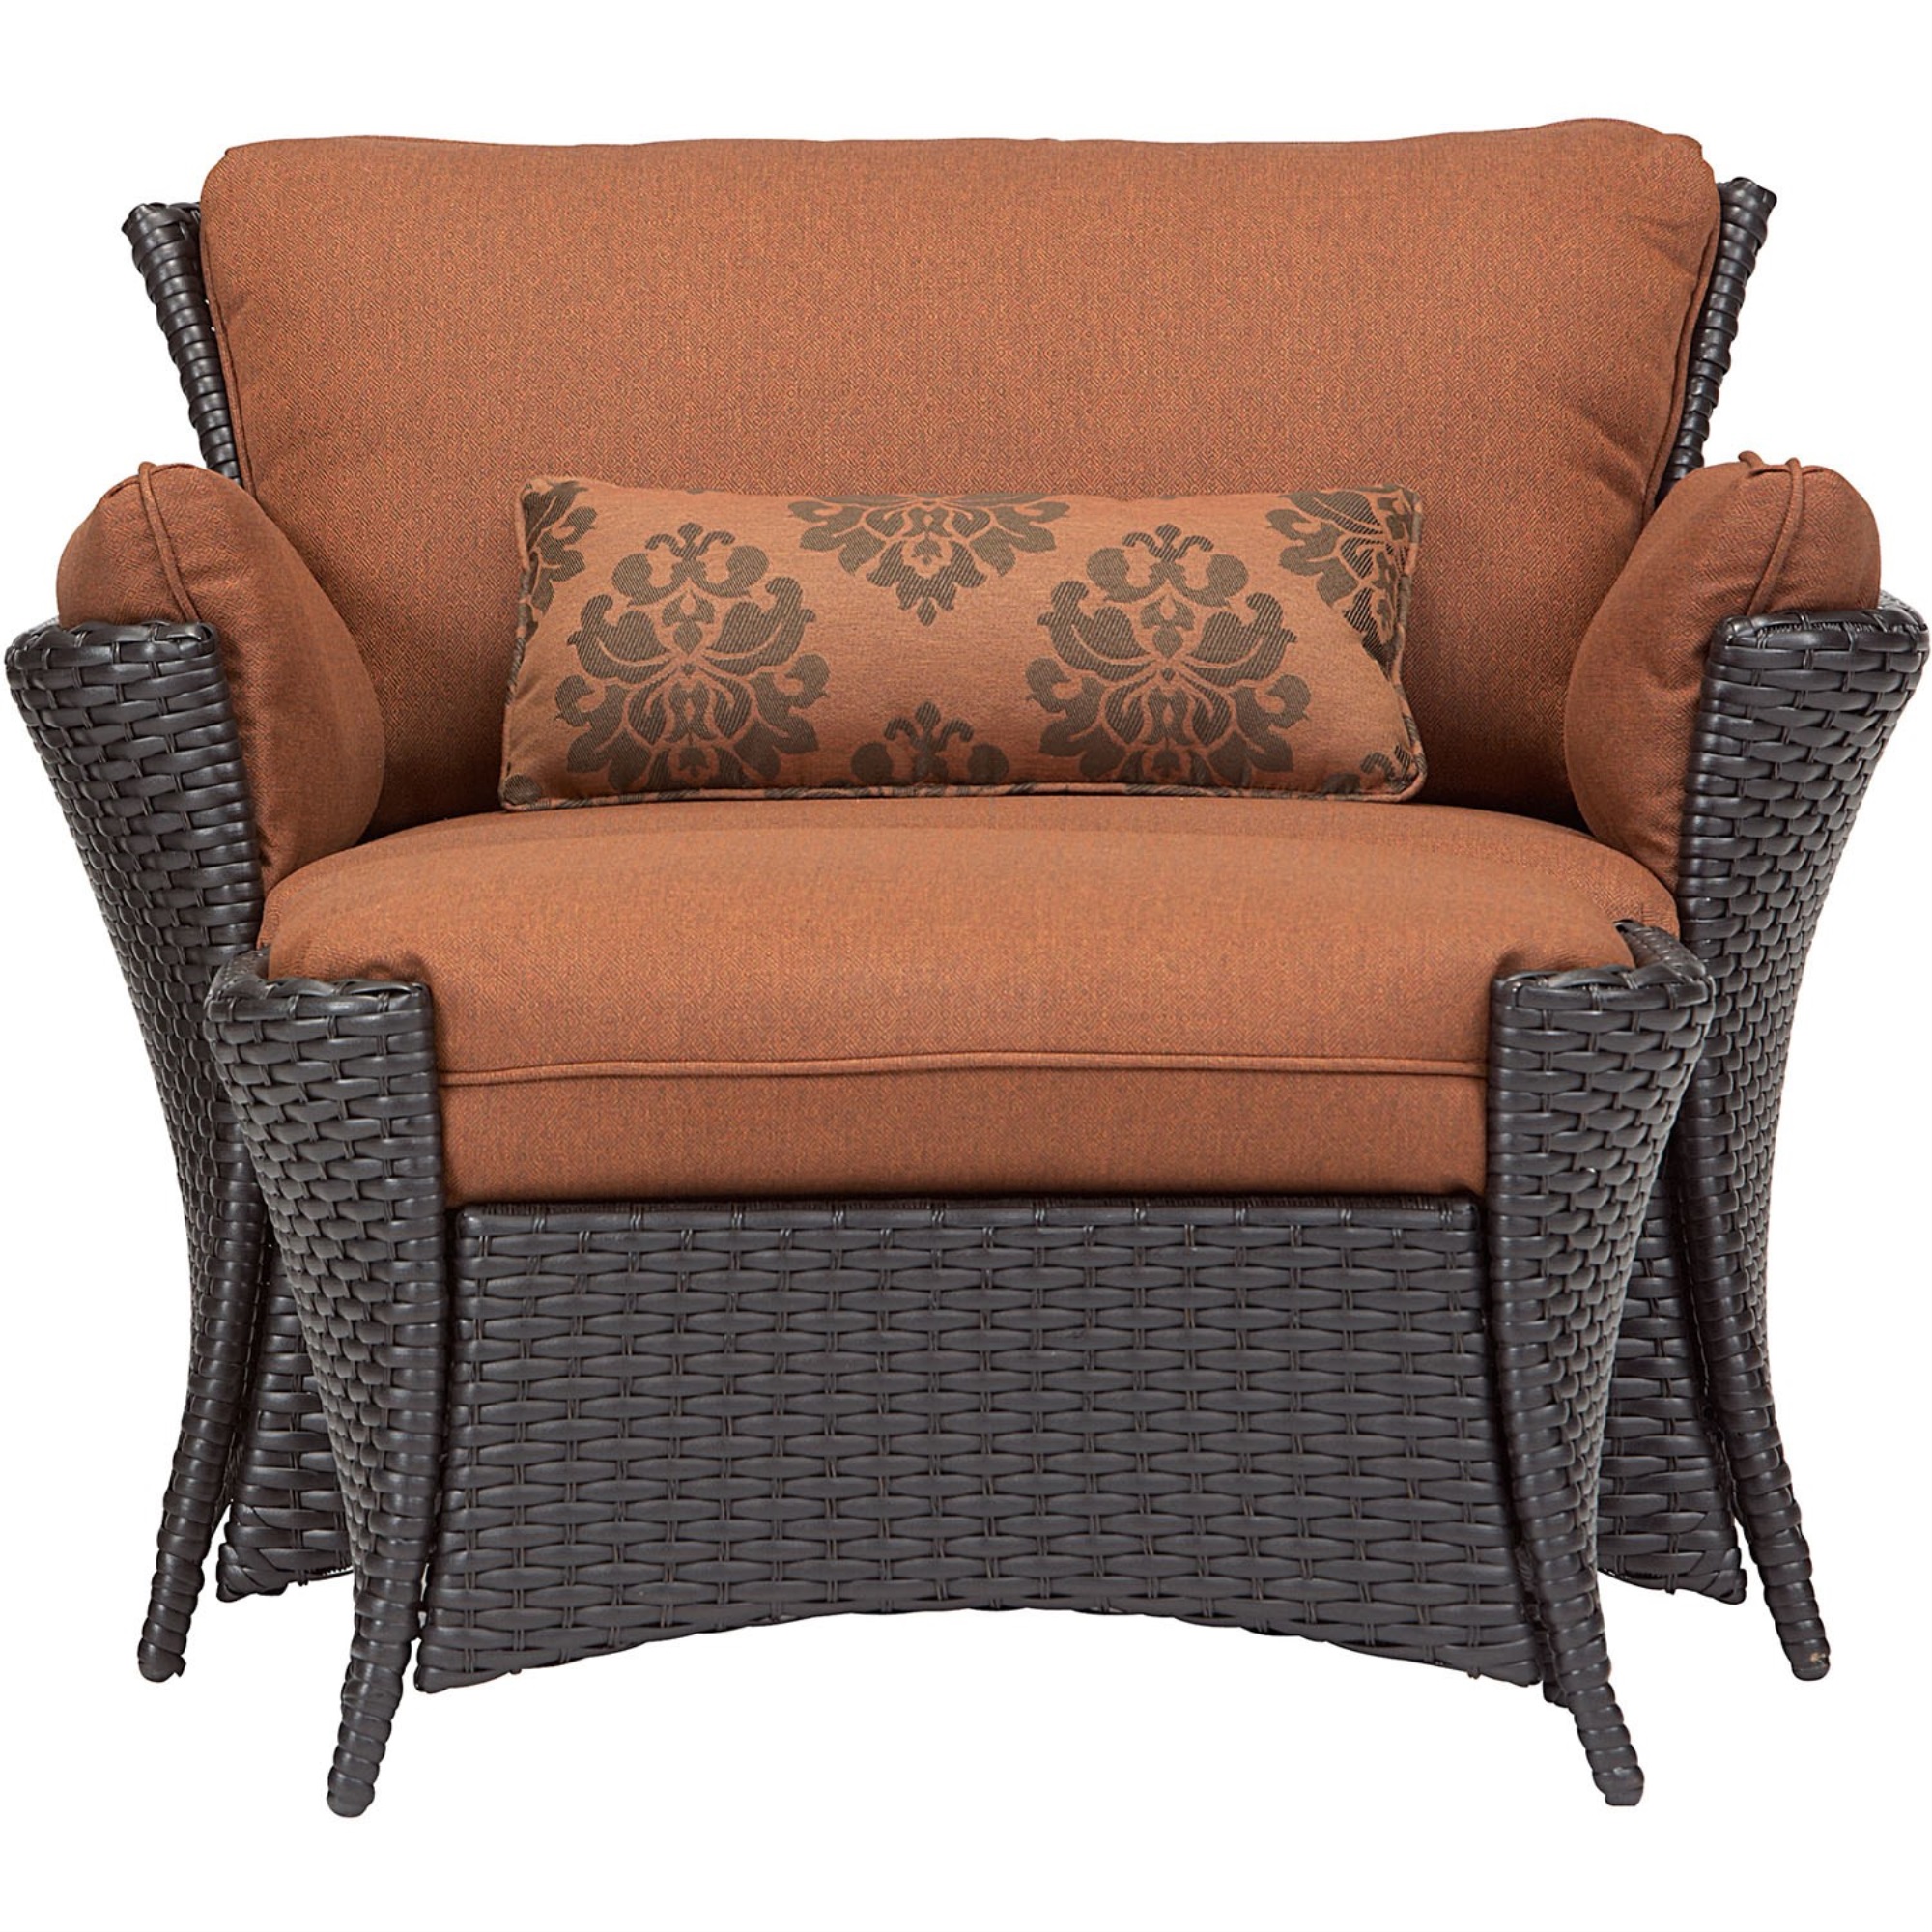 Hanover Strathmere Allure 2pc Seating, Oversized Patio Chairs With Ottoman